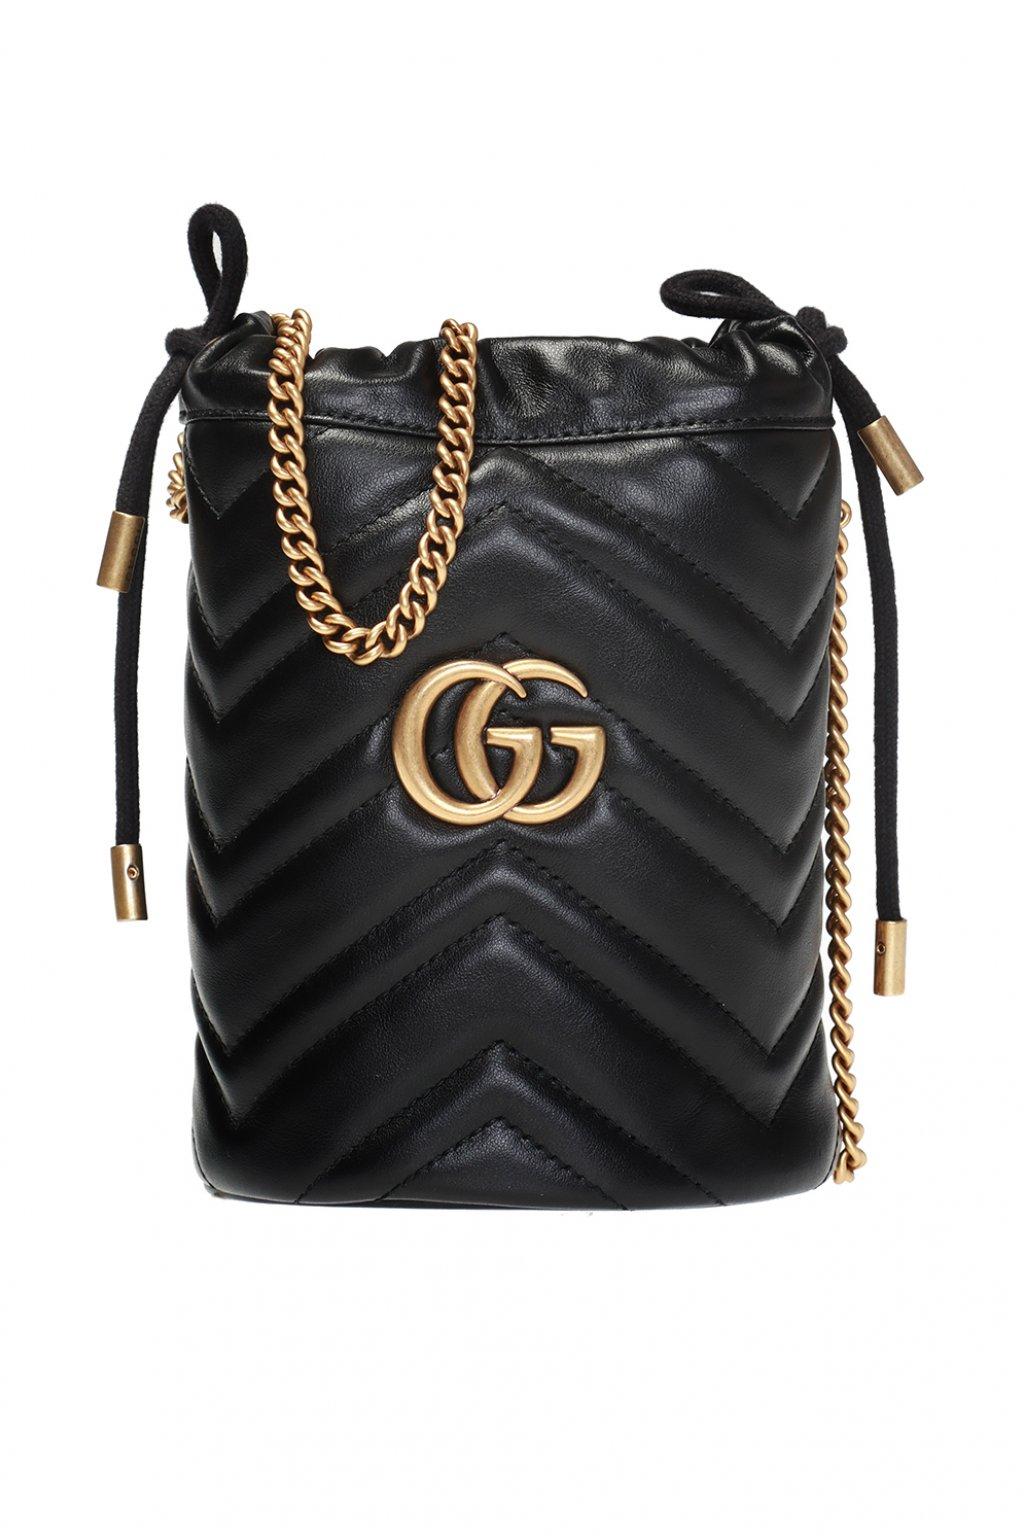 Gucci Leather &#39;GG Marmont&#39; Quilted Shoulder Bag in Beige Black (Black) - Lyst